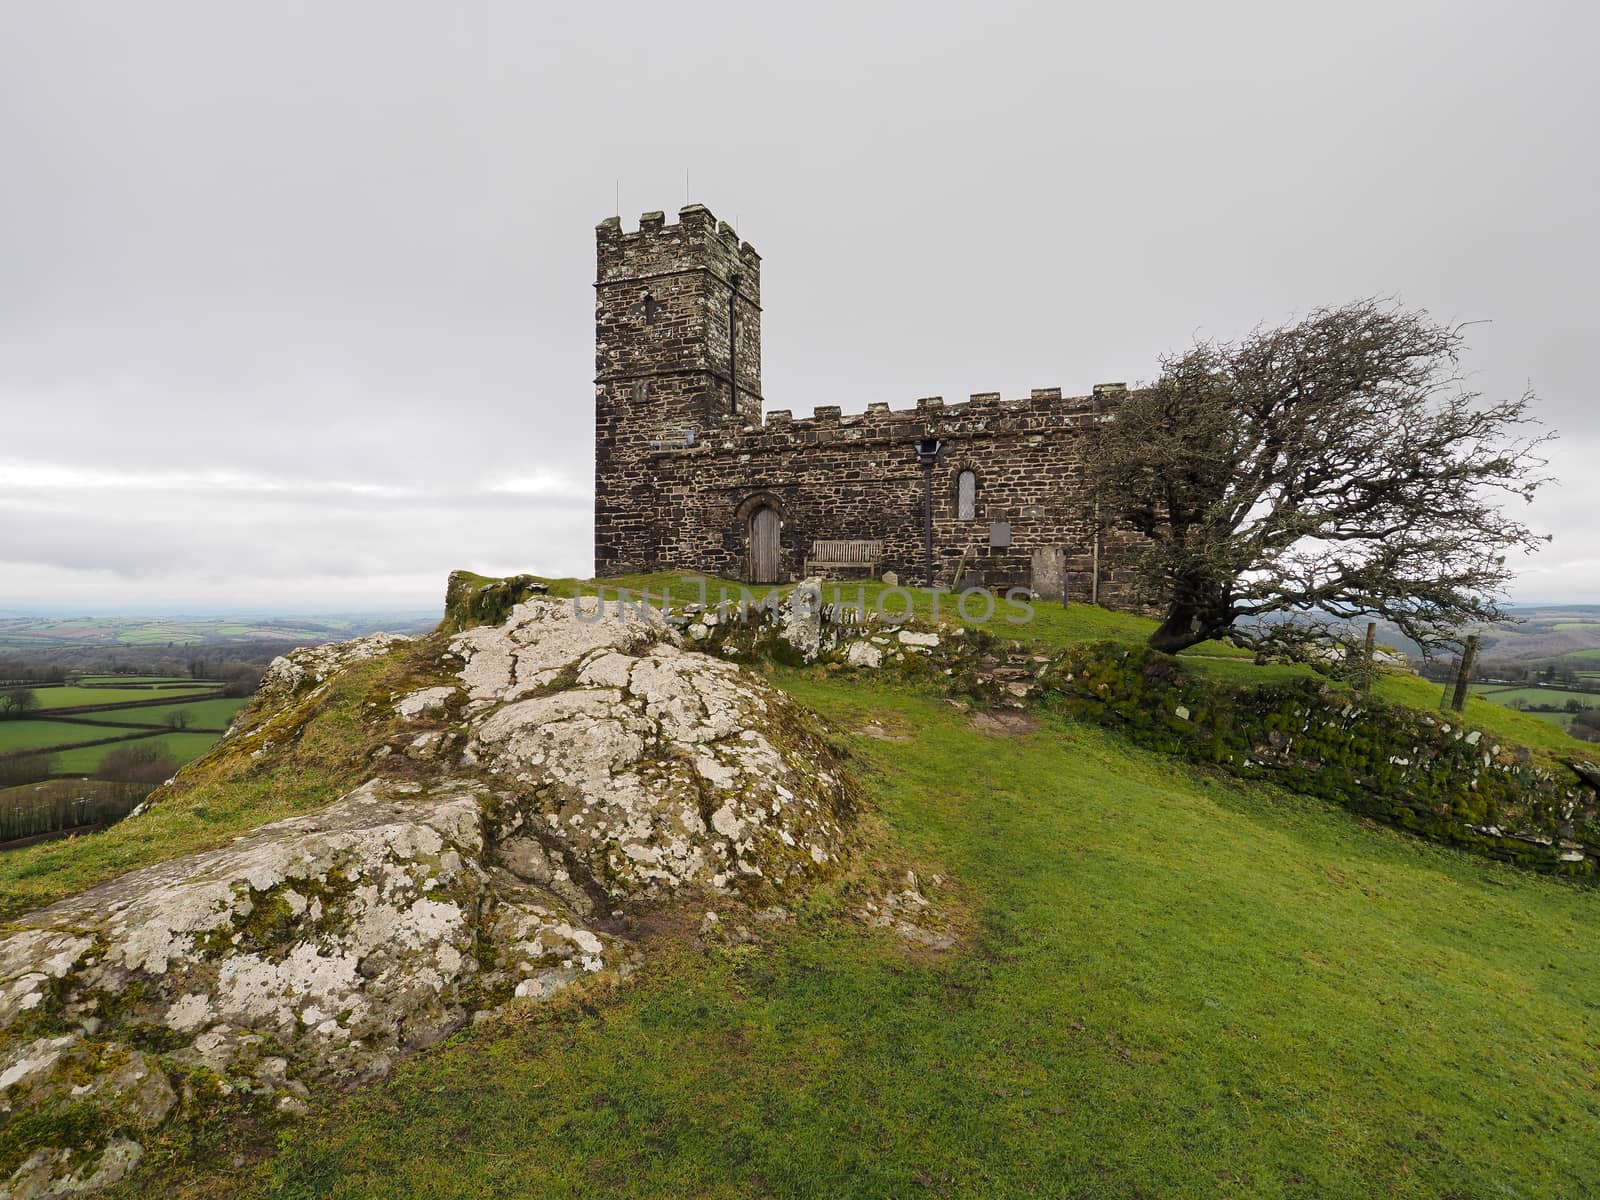 The isolated 13th century church of St Michael de Rupe which sits on top of Brent Tor, an old weathered volcano, Dartmoor National Park, Devon, UK